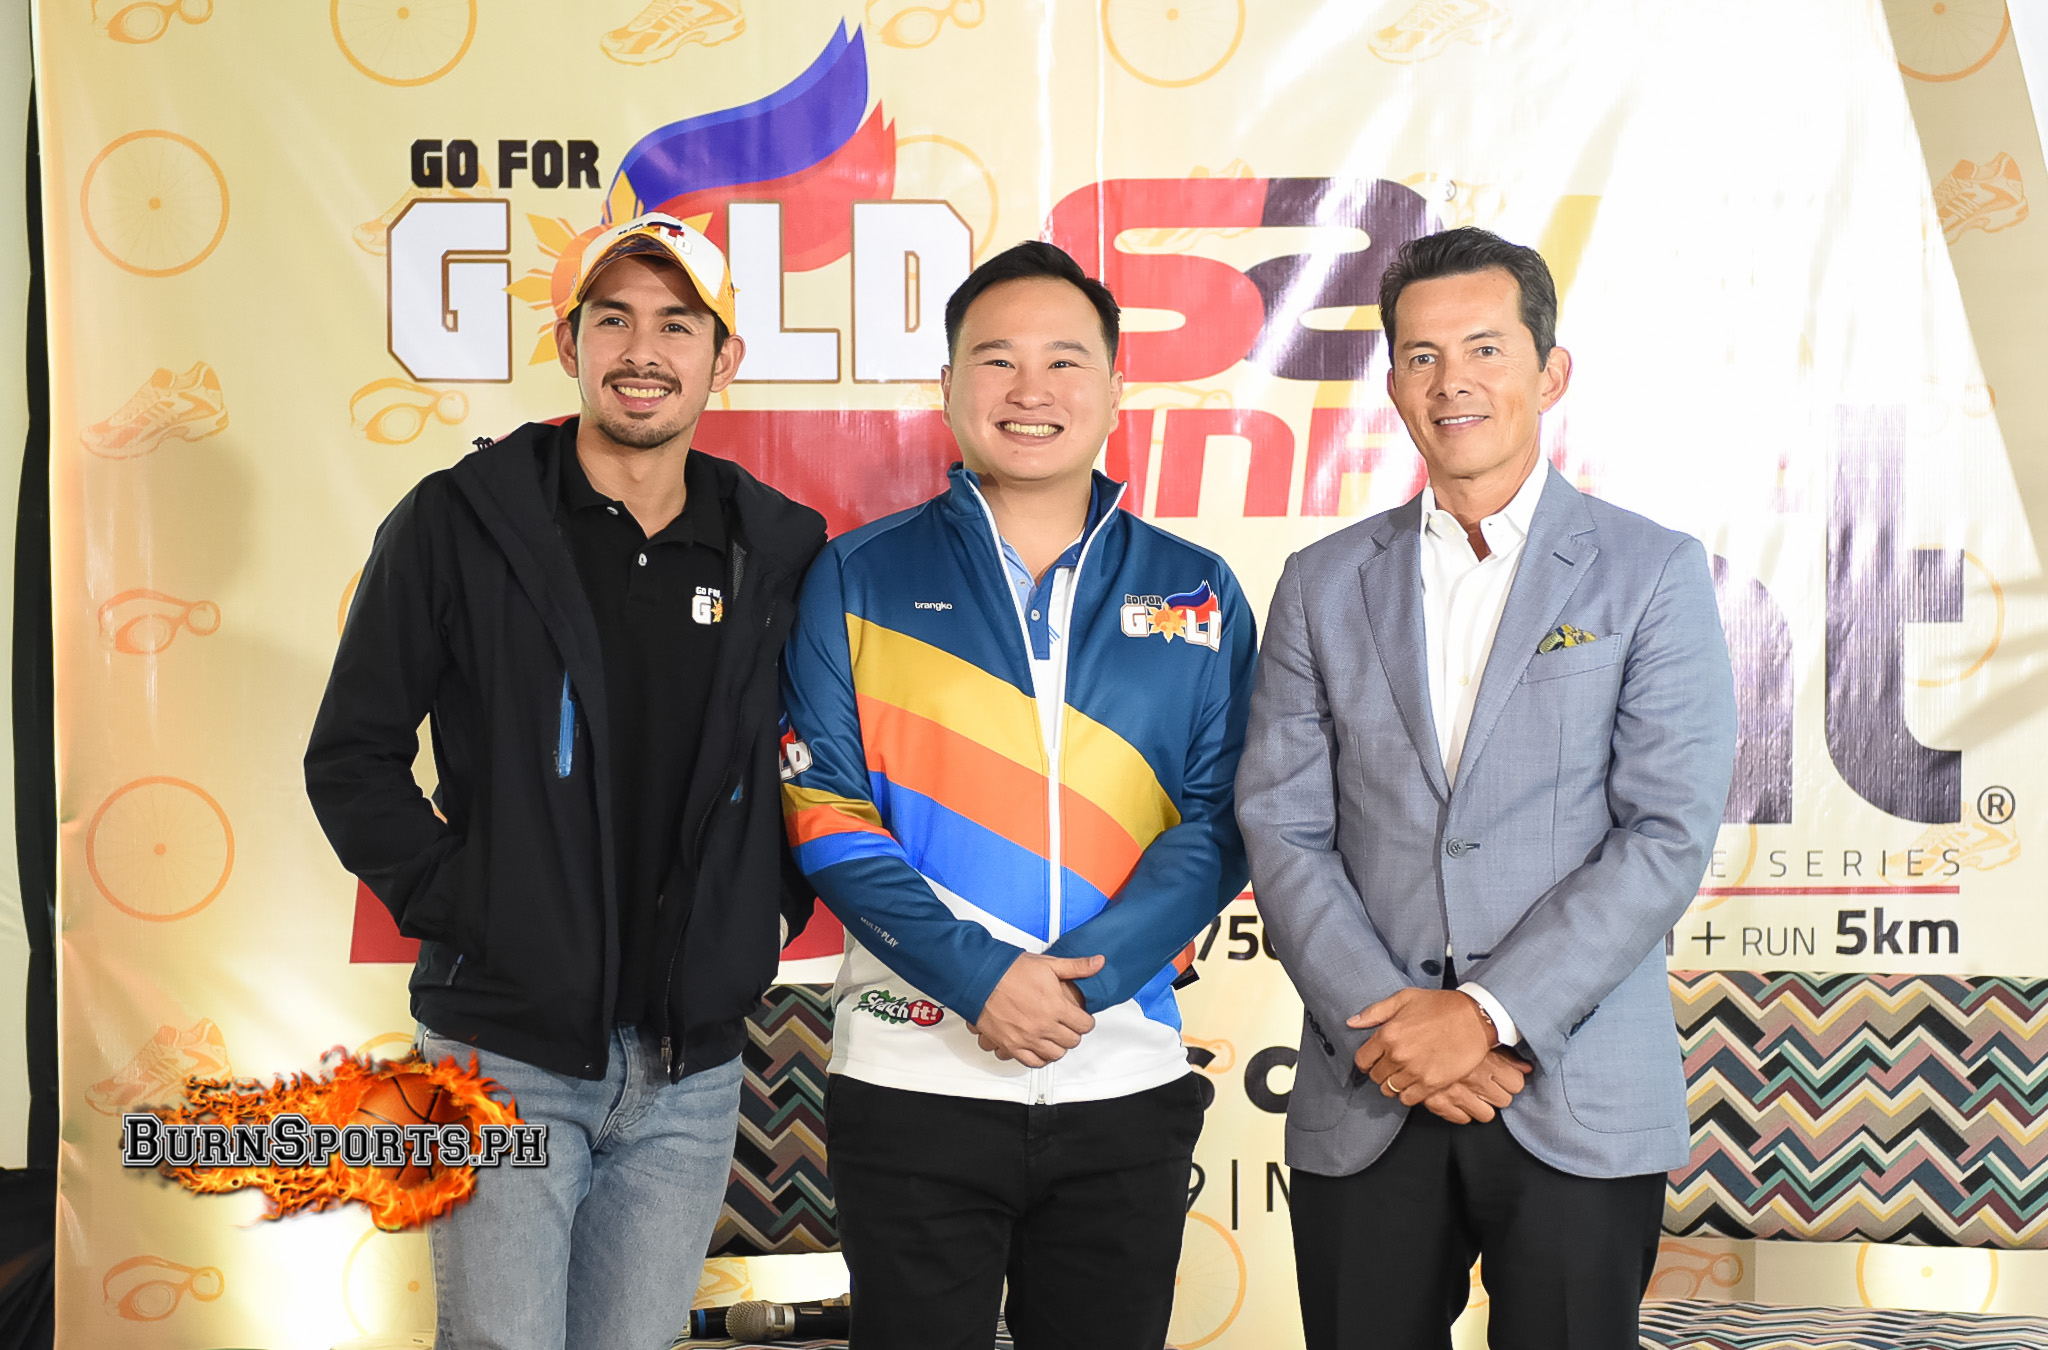 Go For Gold ties up with Sunrise Events to hold Sprint races